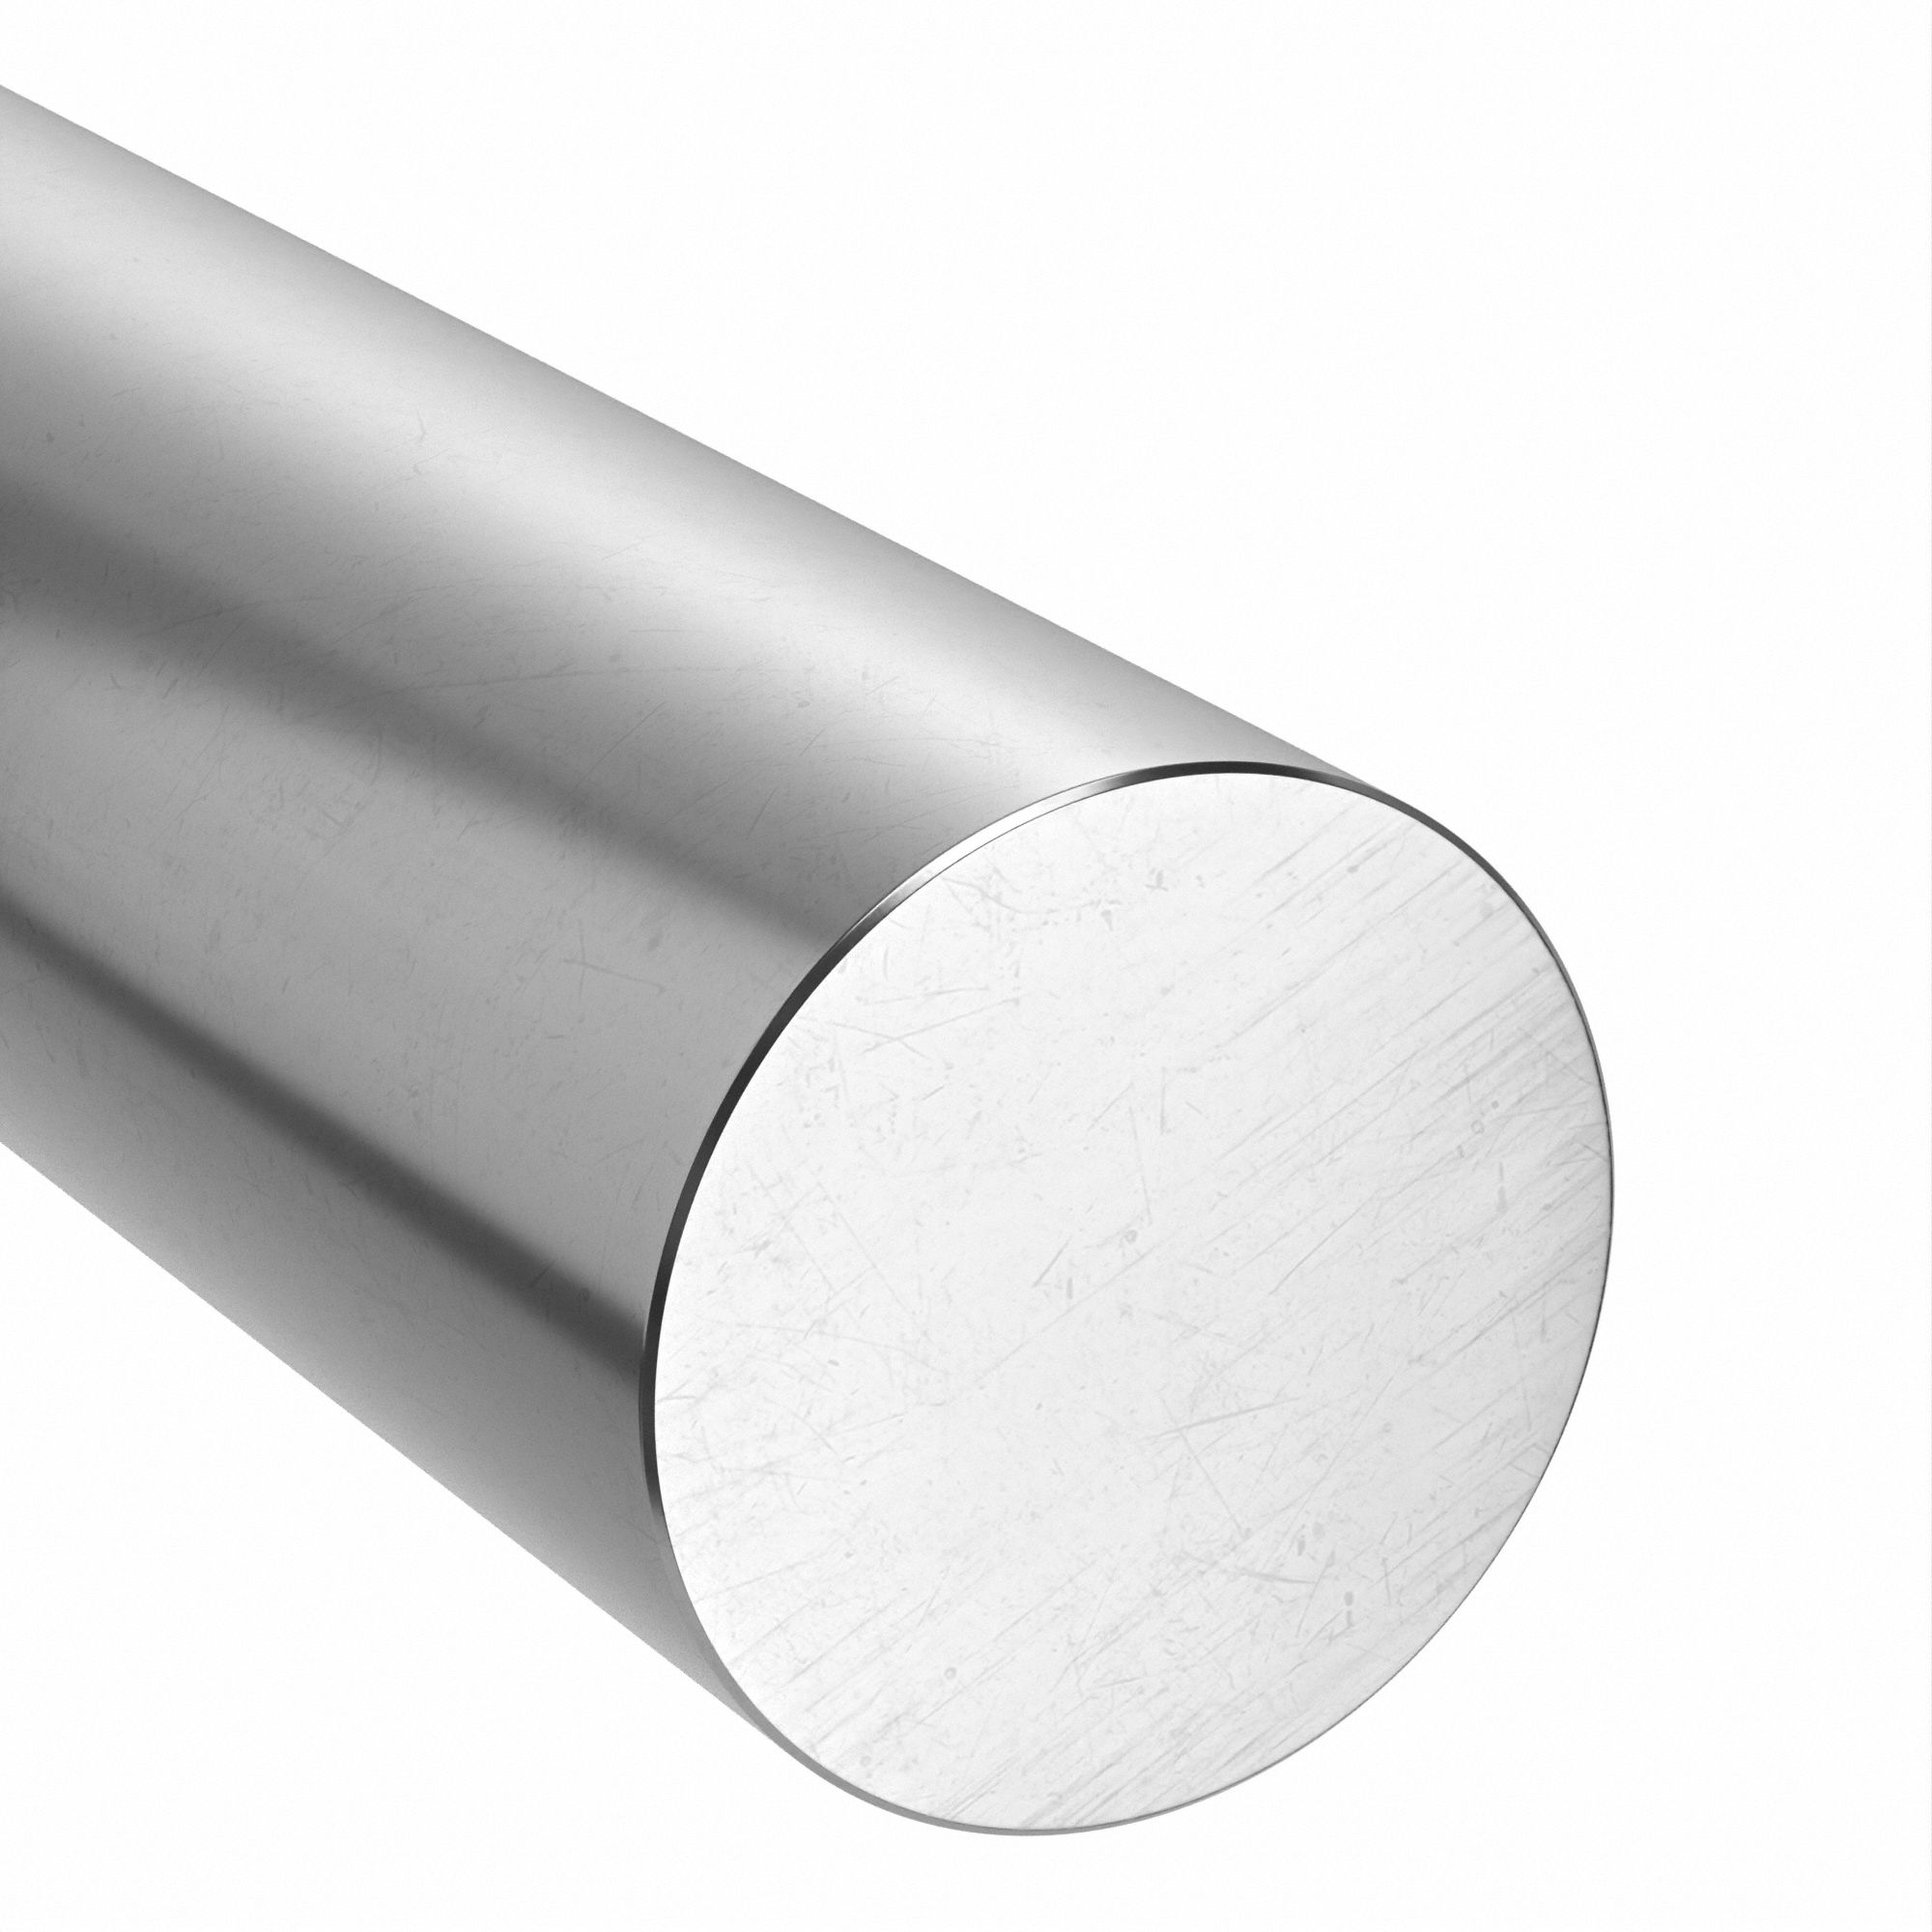 APPROVED VENDOR ROD,SS,303,1/4 IN DIA X 6 FT L - Stainless Steel